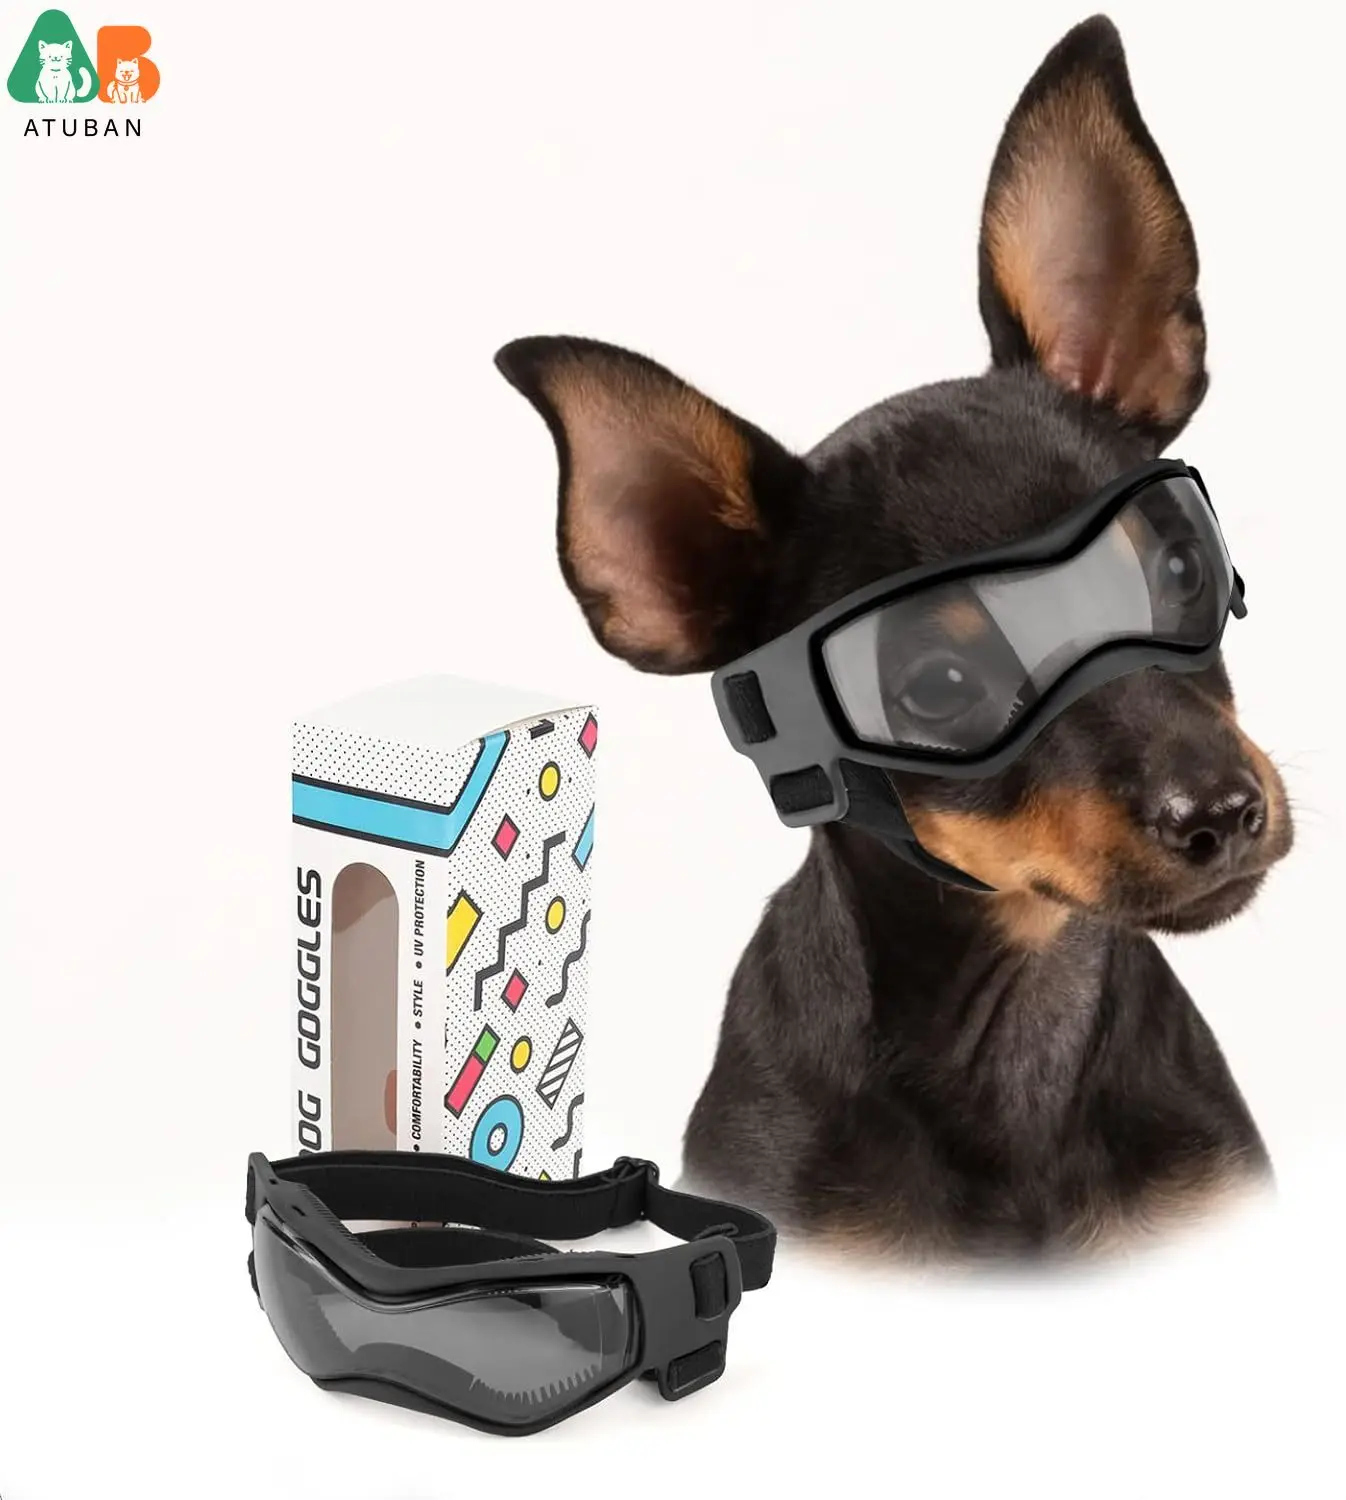 

ATUBAN Dog Goggles Small Breed, Dog Sunglasses for Small Breed UV Protection Eyewear for Small Dog Outdoor Riding Driving,Small